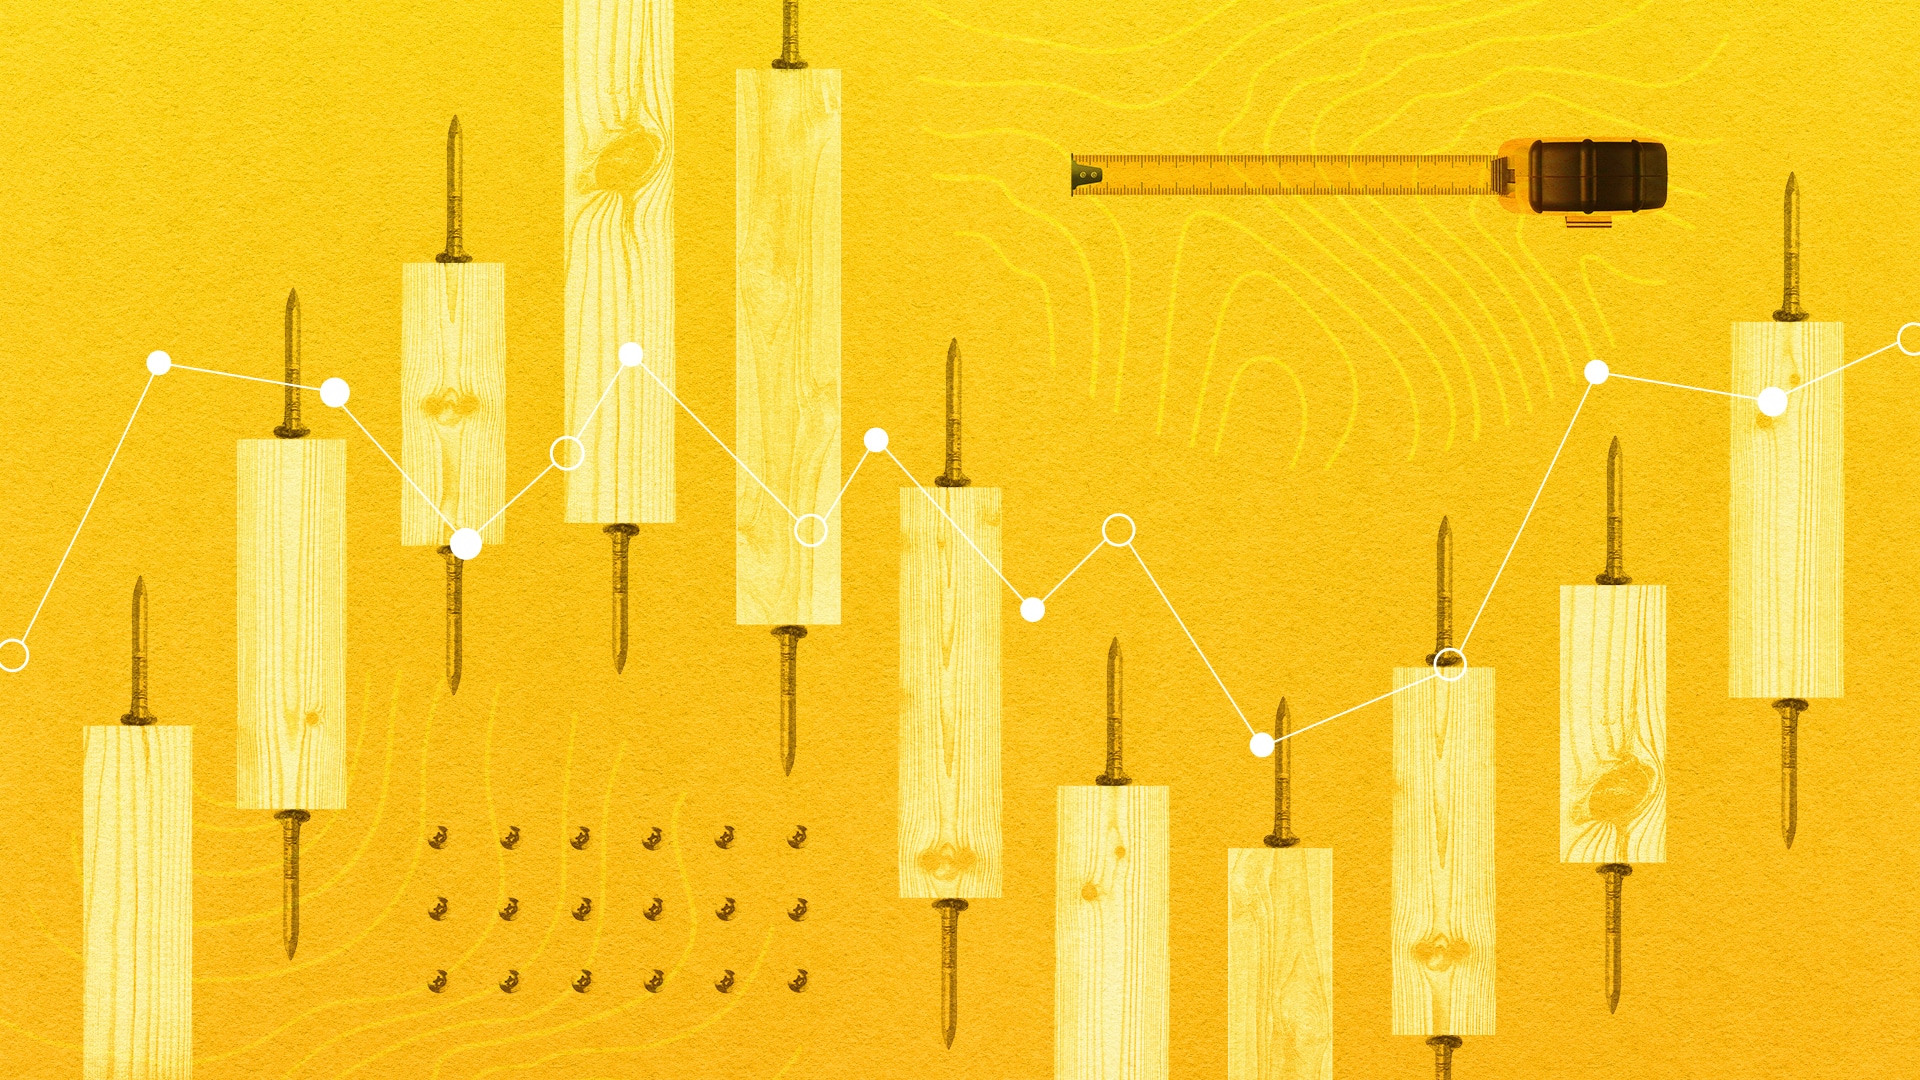 Illustration of wooden planks made to look like a candlestick chart, a tape measure, wood grain, nails and screws appear in the background.